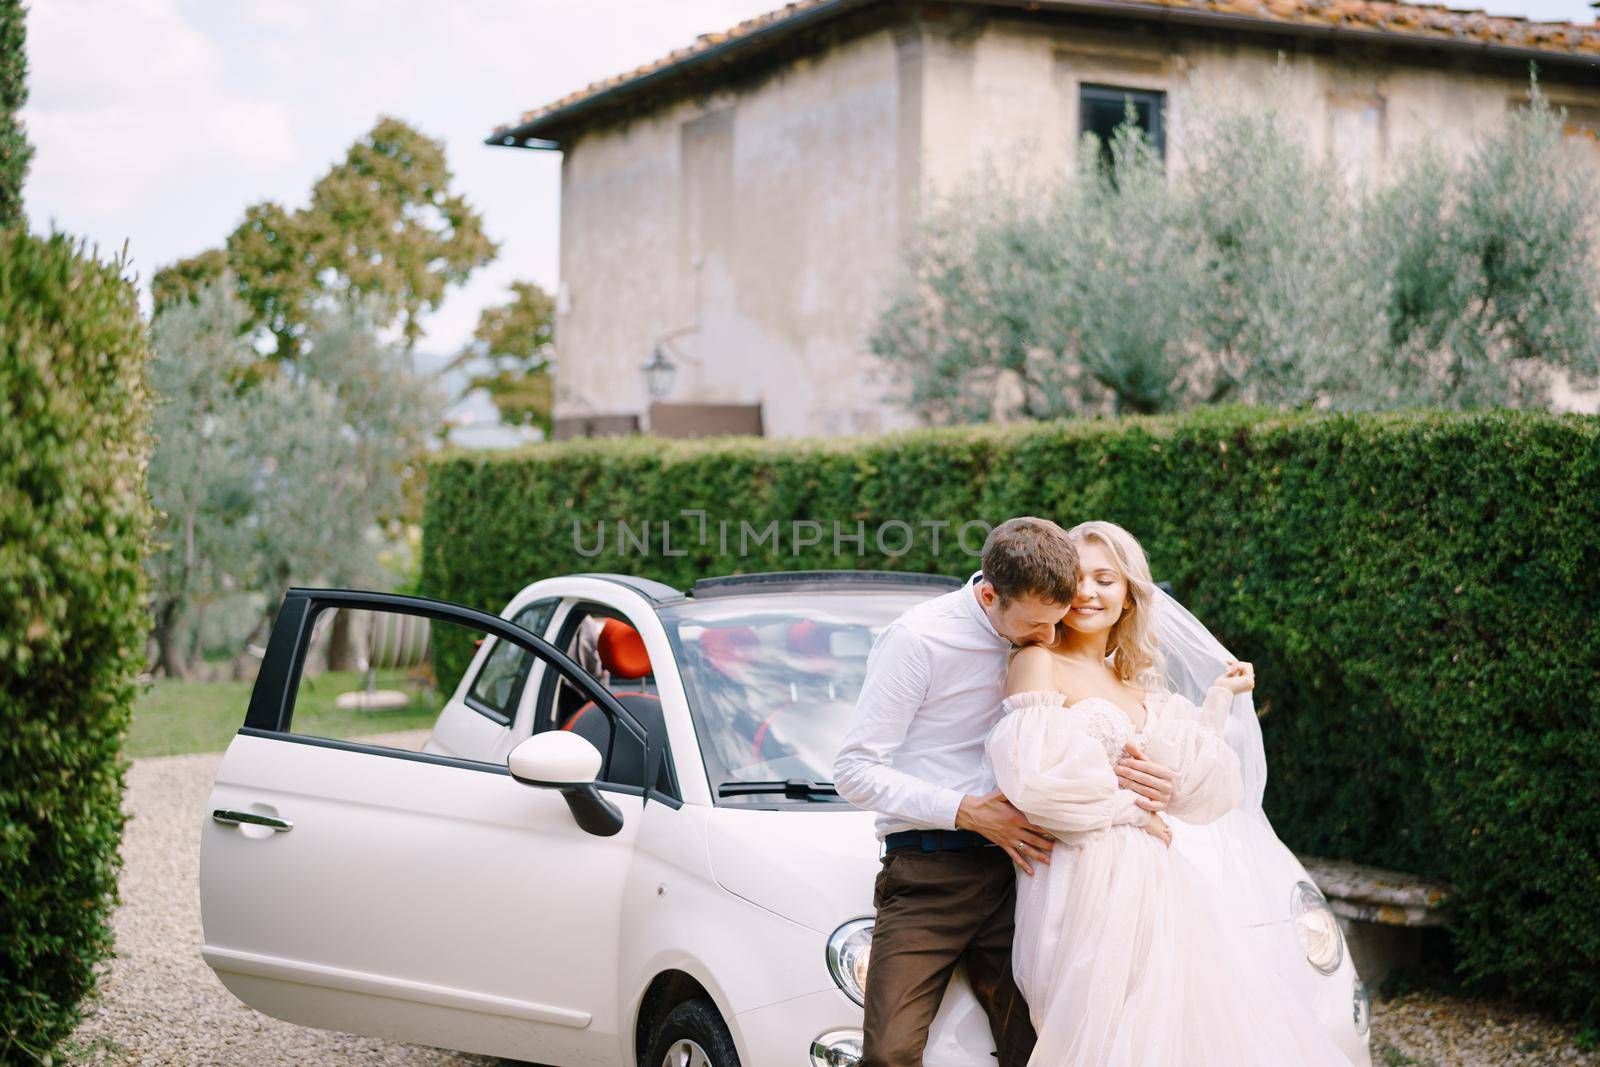 Groom kissing his bride on the dhoulder in front convertible at the old villa in Italy, in Tuscany, near Florence by Nadtochiy